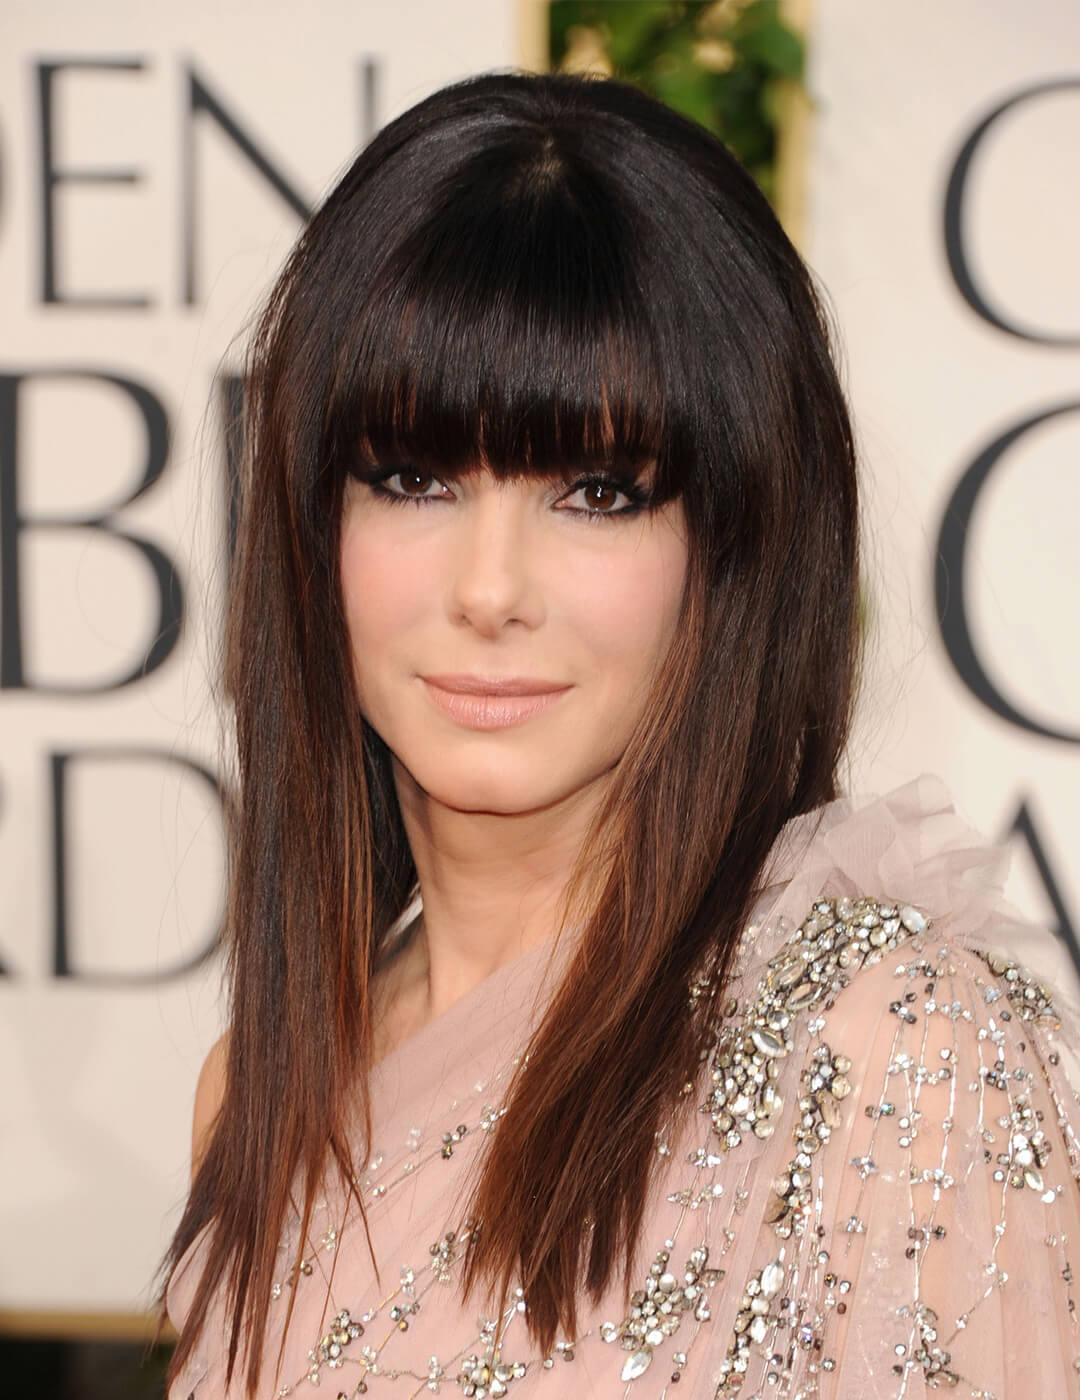 Sandra Bullock rocking full bangs and sequined nude dress at the red carpet